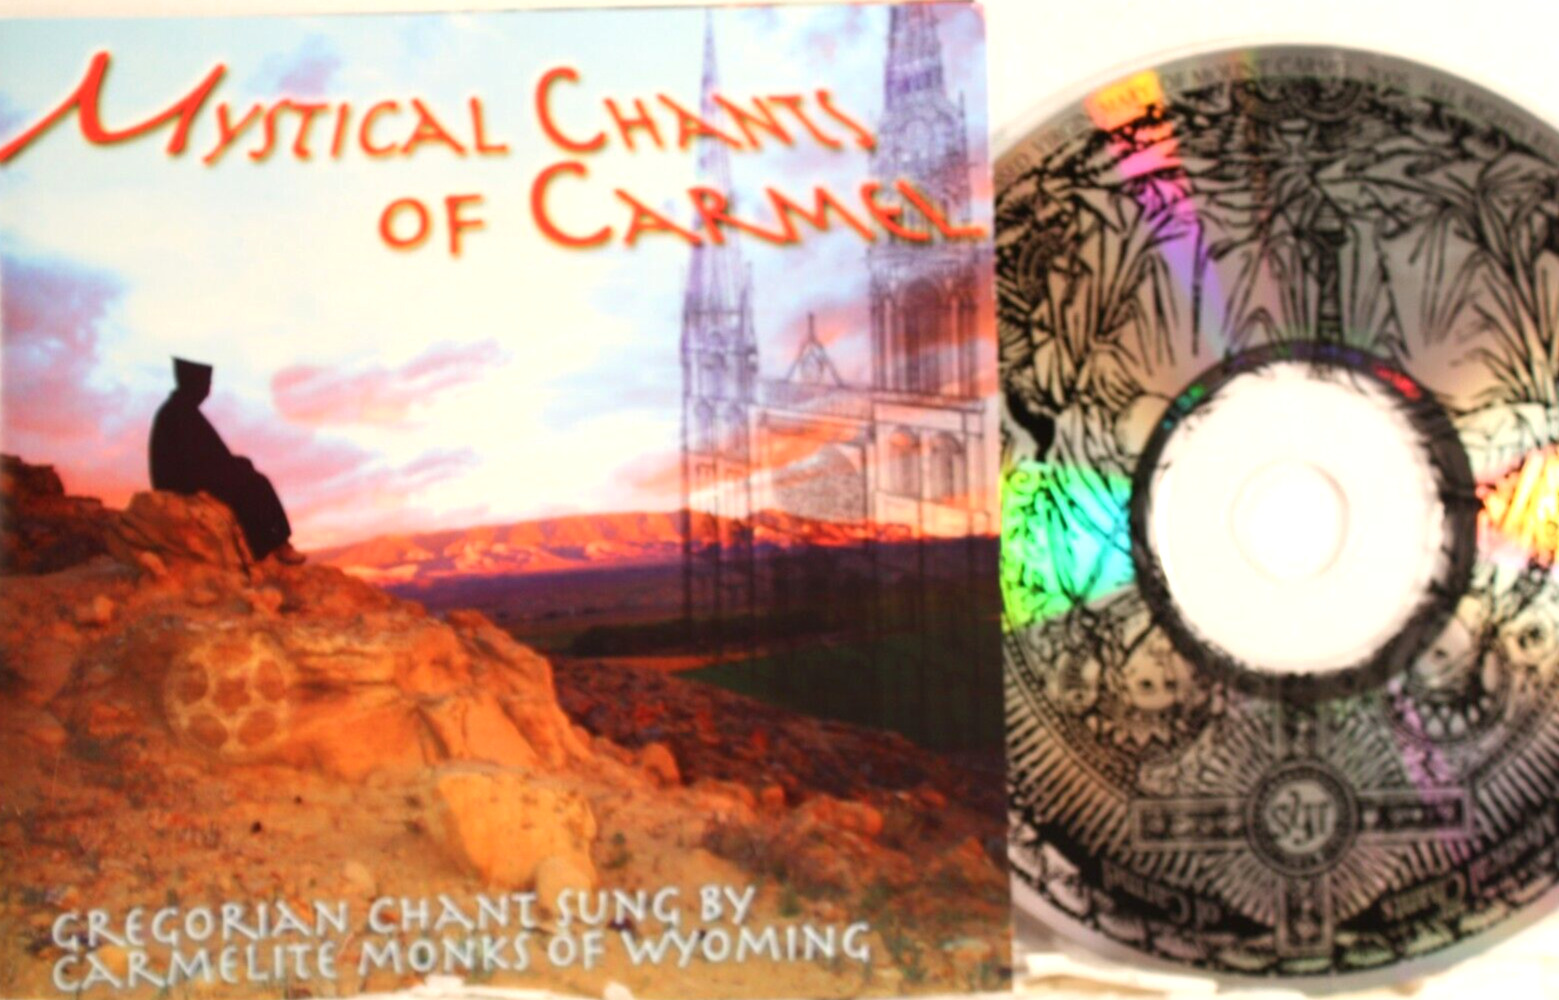 Mystical Chants of Carmel (CD) By: Carmelite Monks of Wyoming VG Cond Ships Free